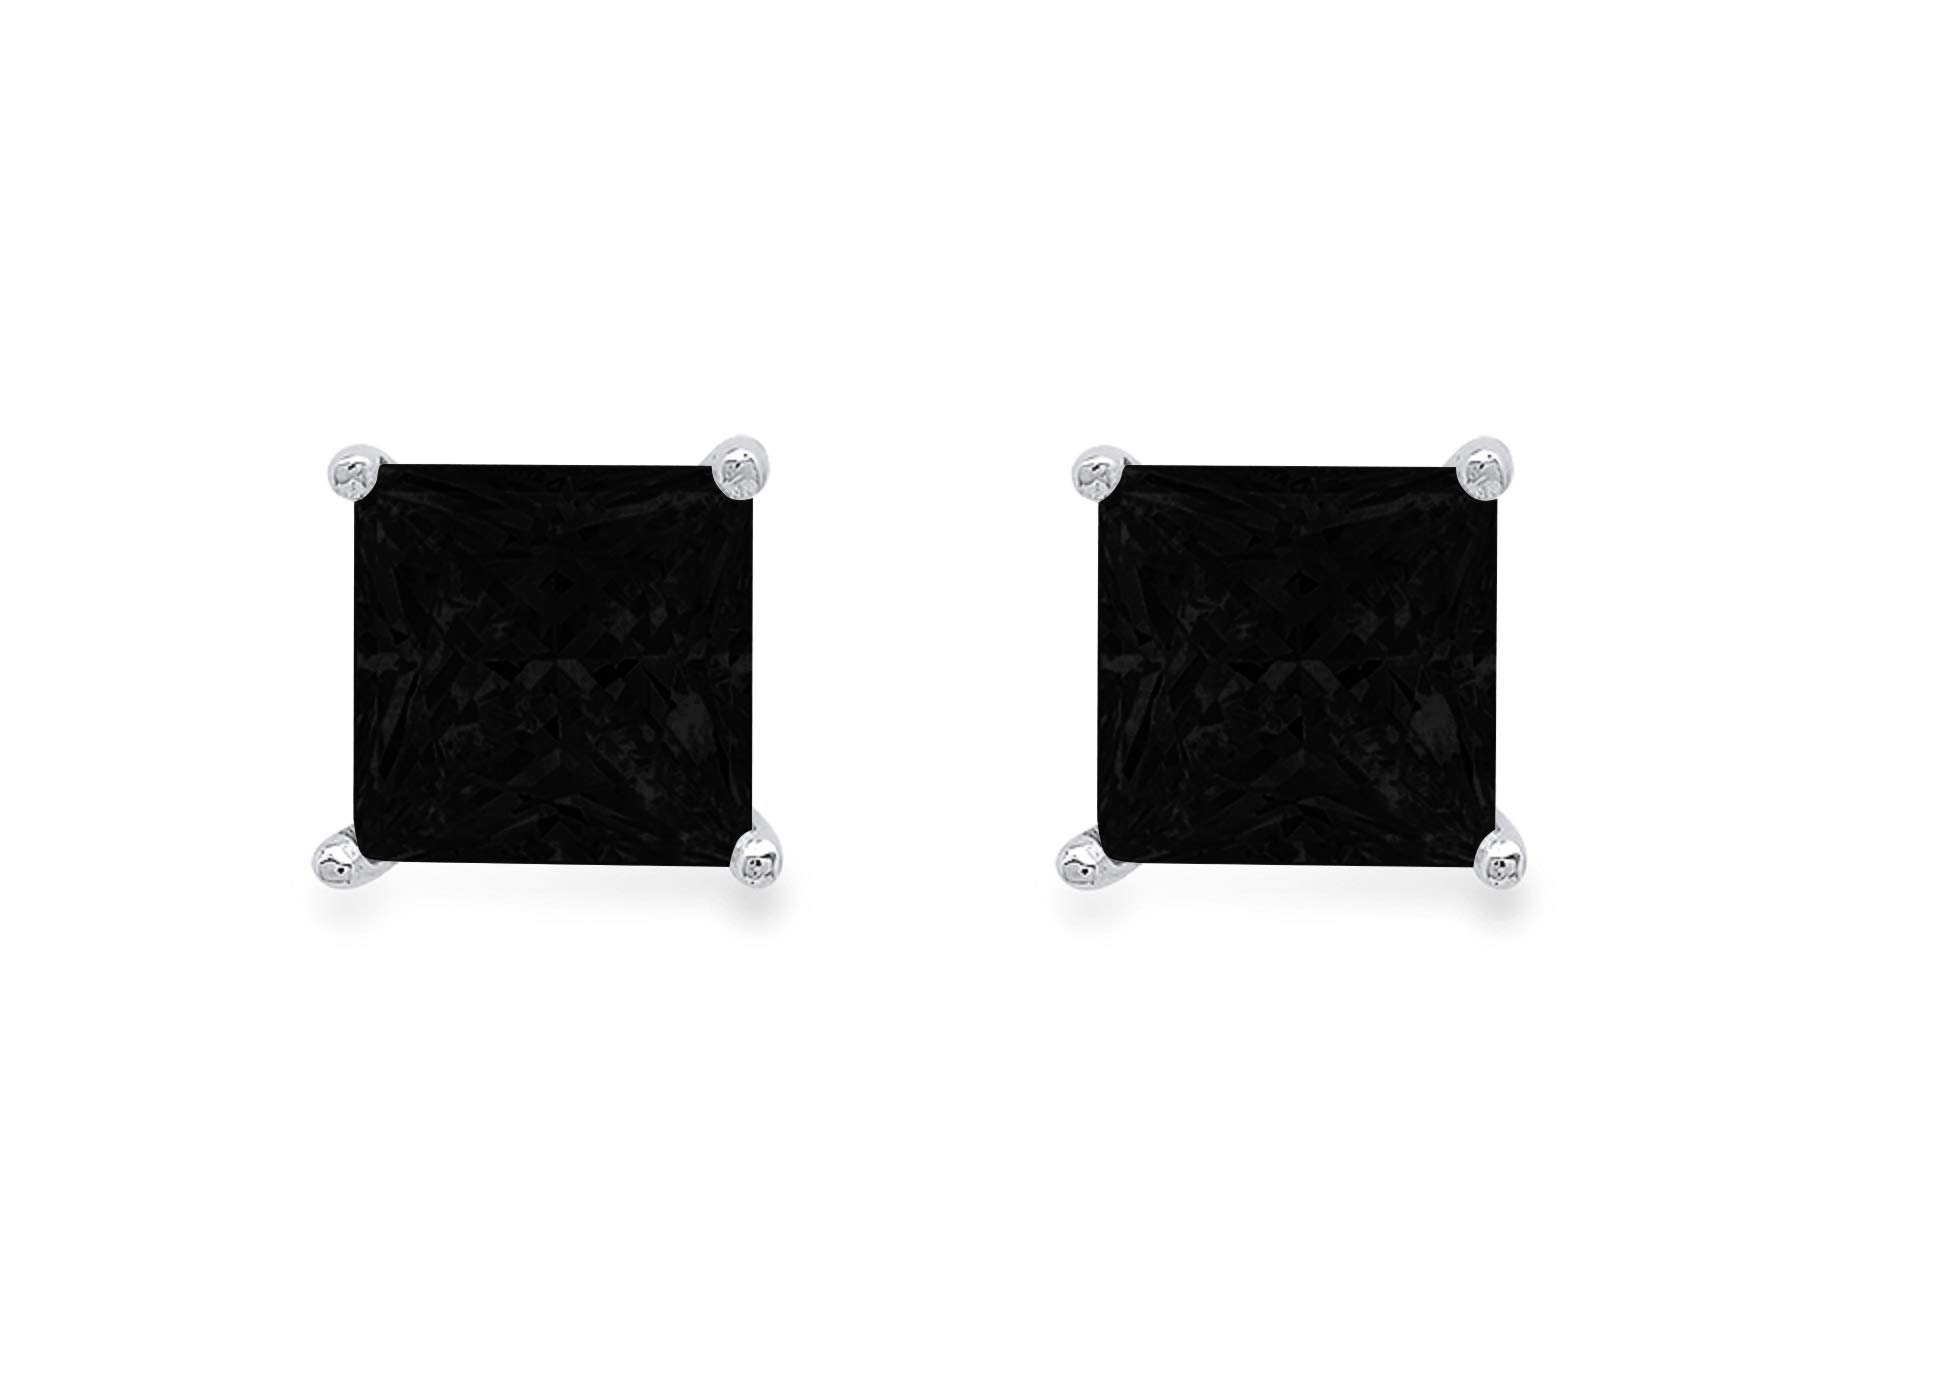 2.9ct Brilliant Princess Cut Solitaire Flawless Genuine Natural Black Onyx Gemstone Unisex Pair of Stud Designer Earrings Solid 14k White Gold Push Back conflict free Jewelry